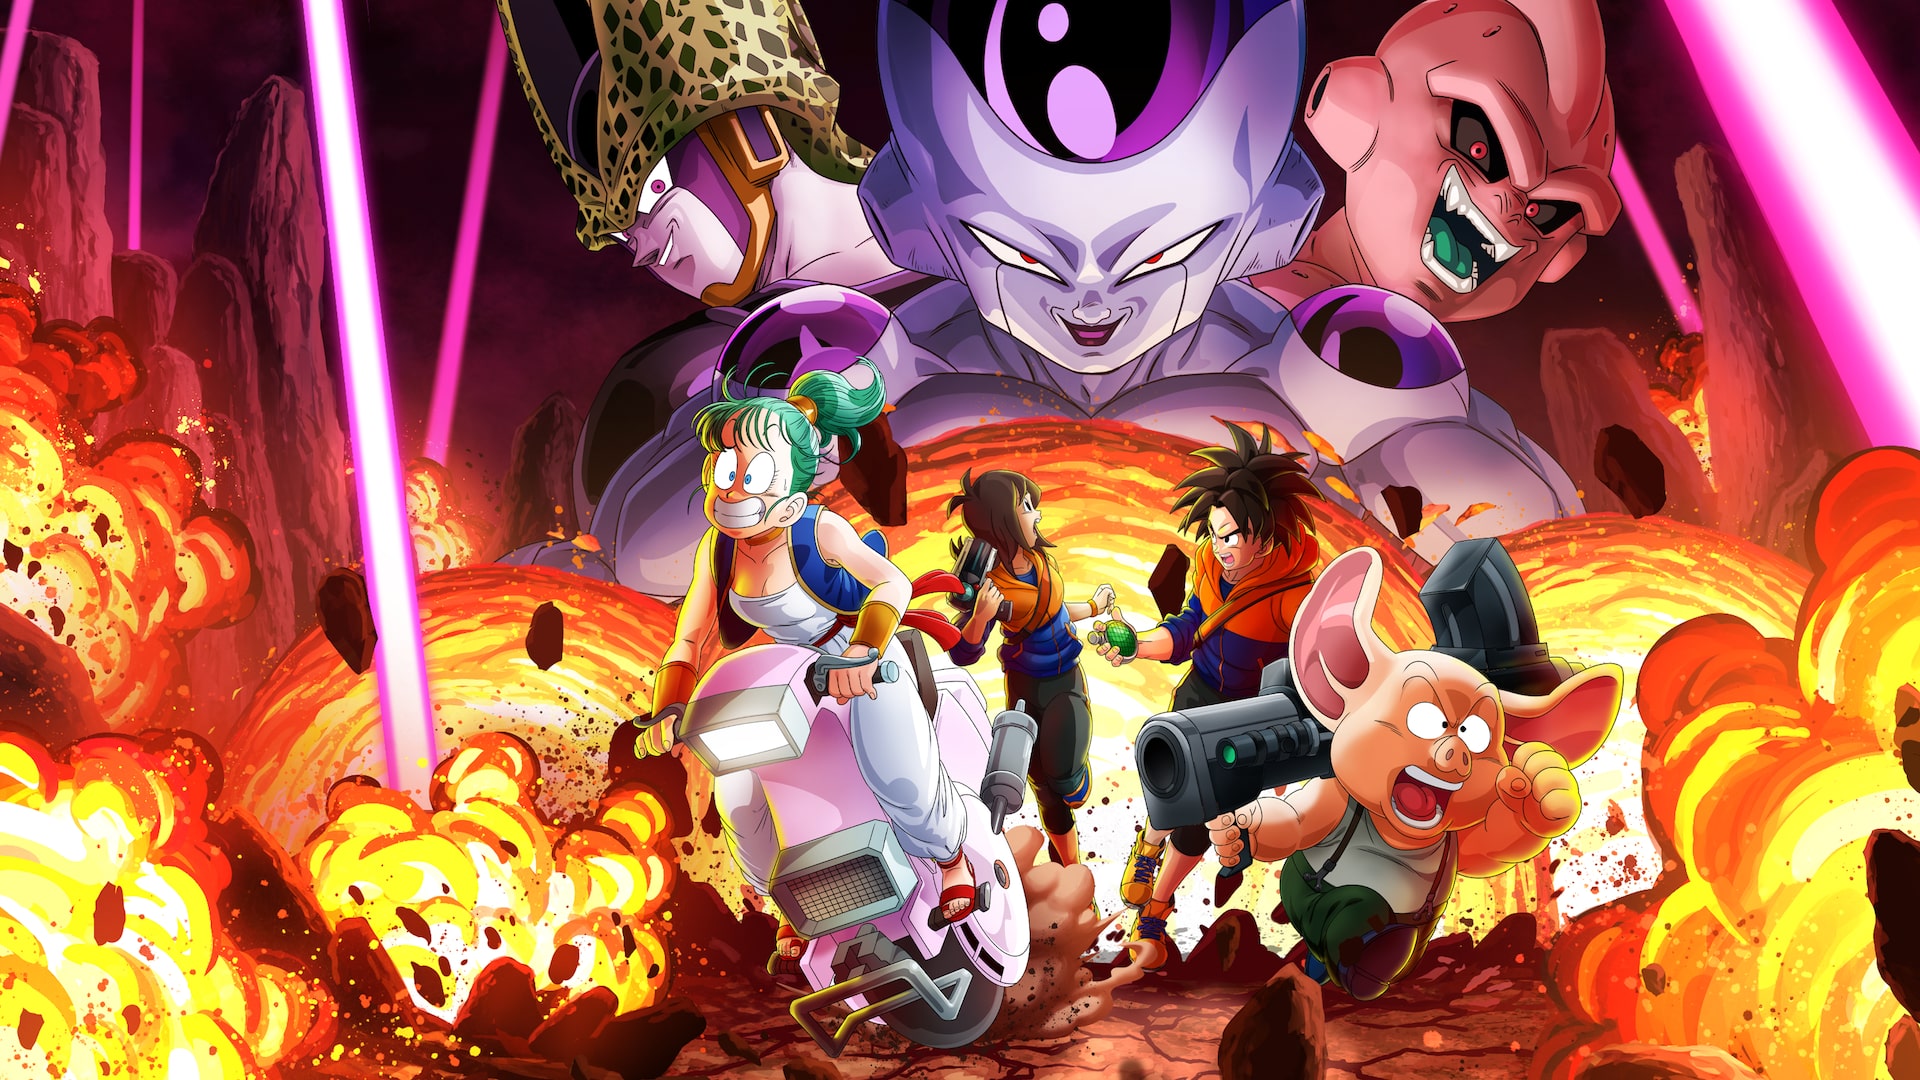 Dragon Ball: The Breakers - Open beta test now available (servers go live  9/21 6 PM PDT)